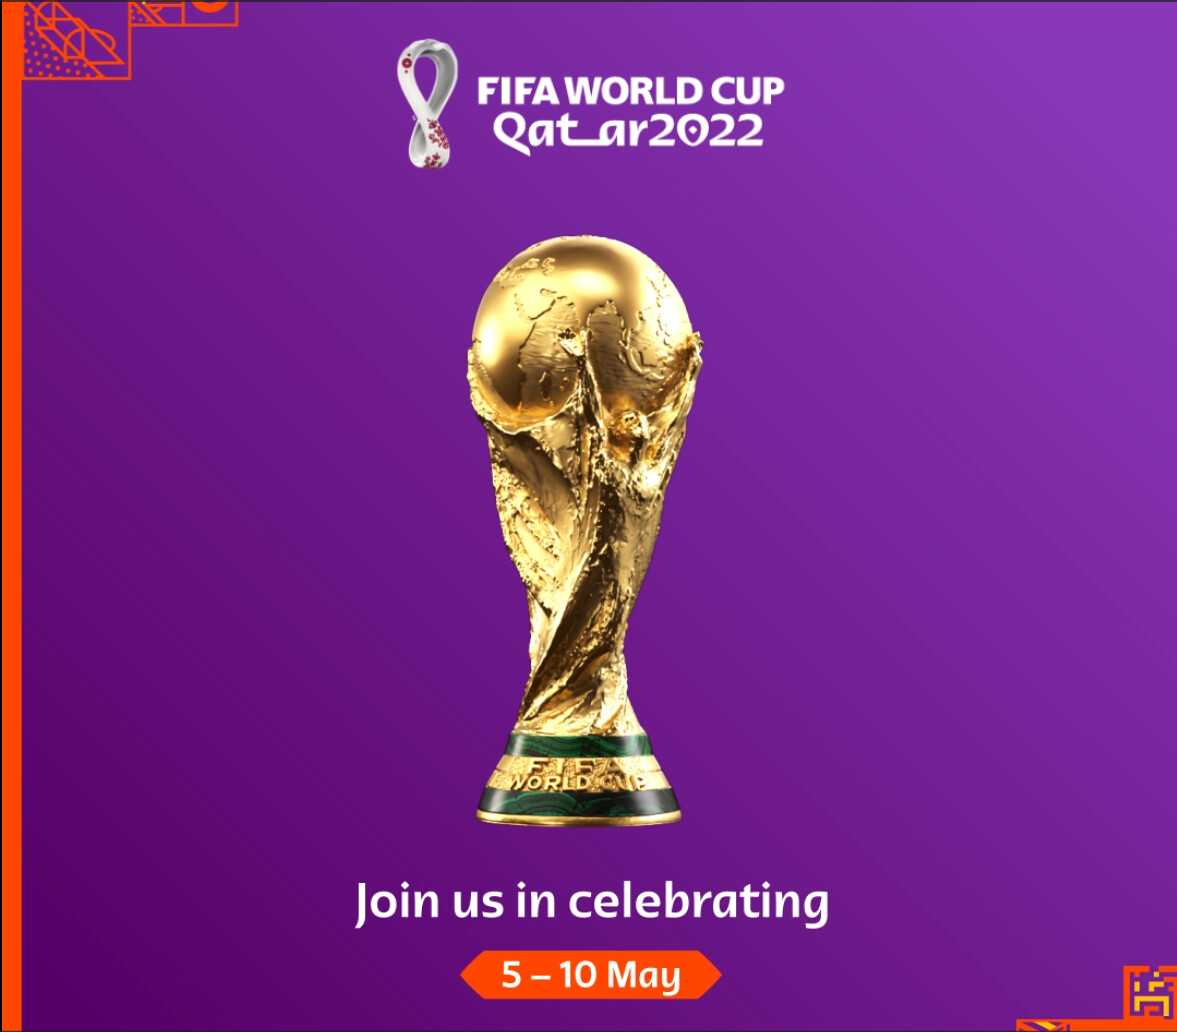 Animation for the World Cup 200 Days to Go campaign